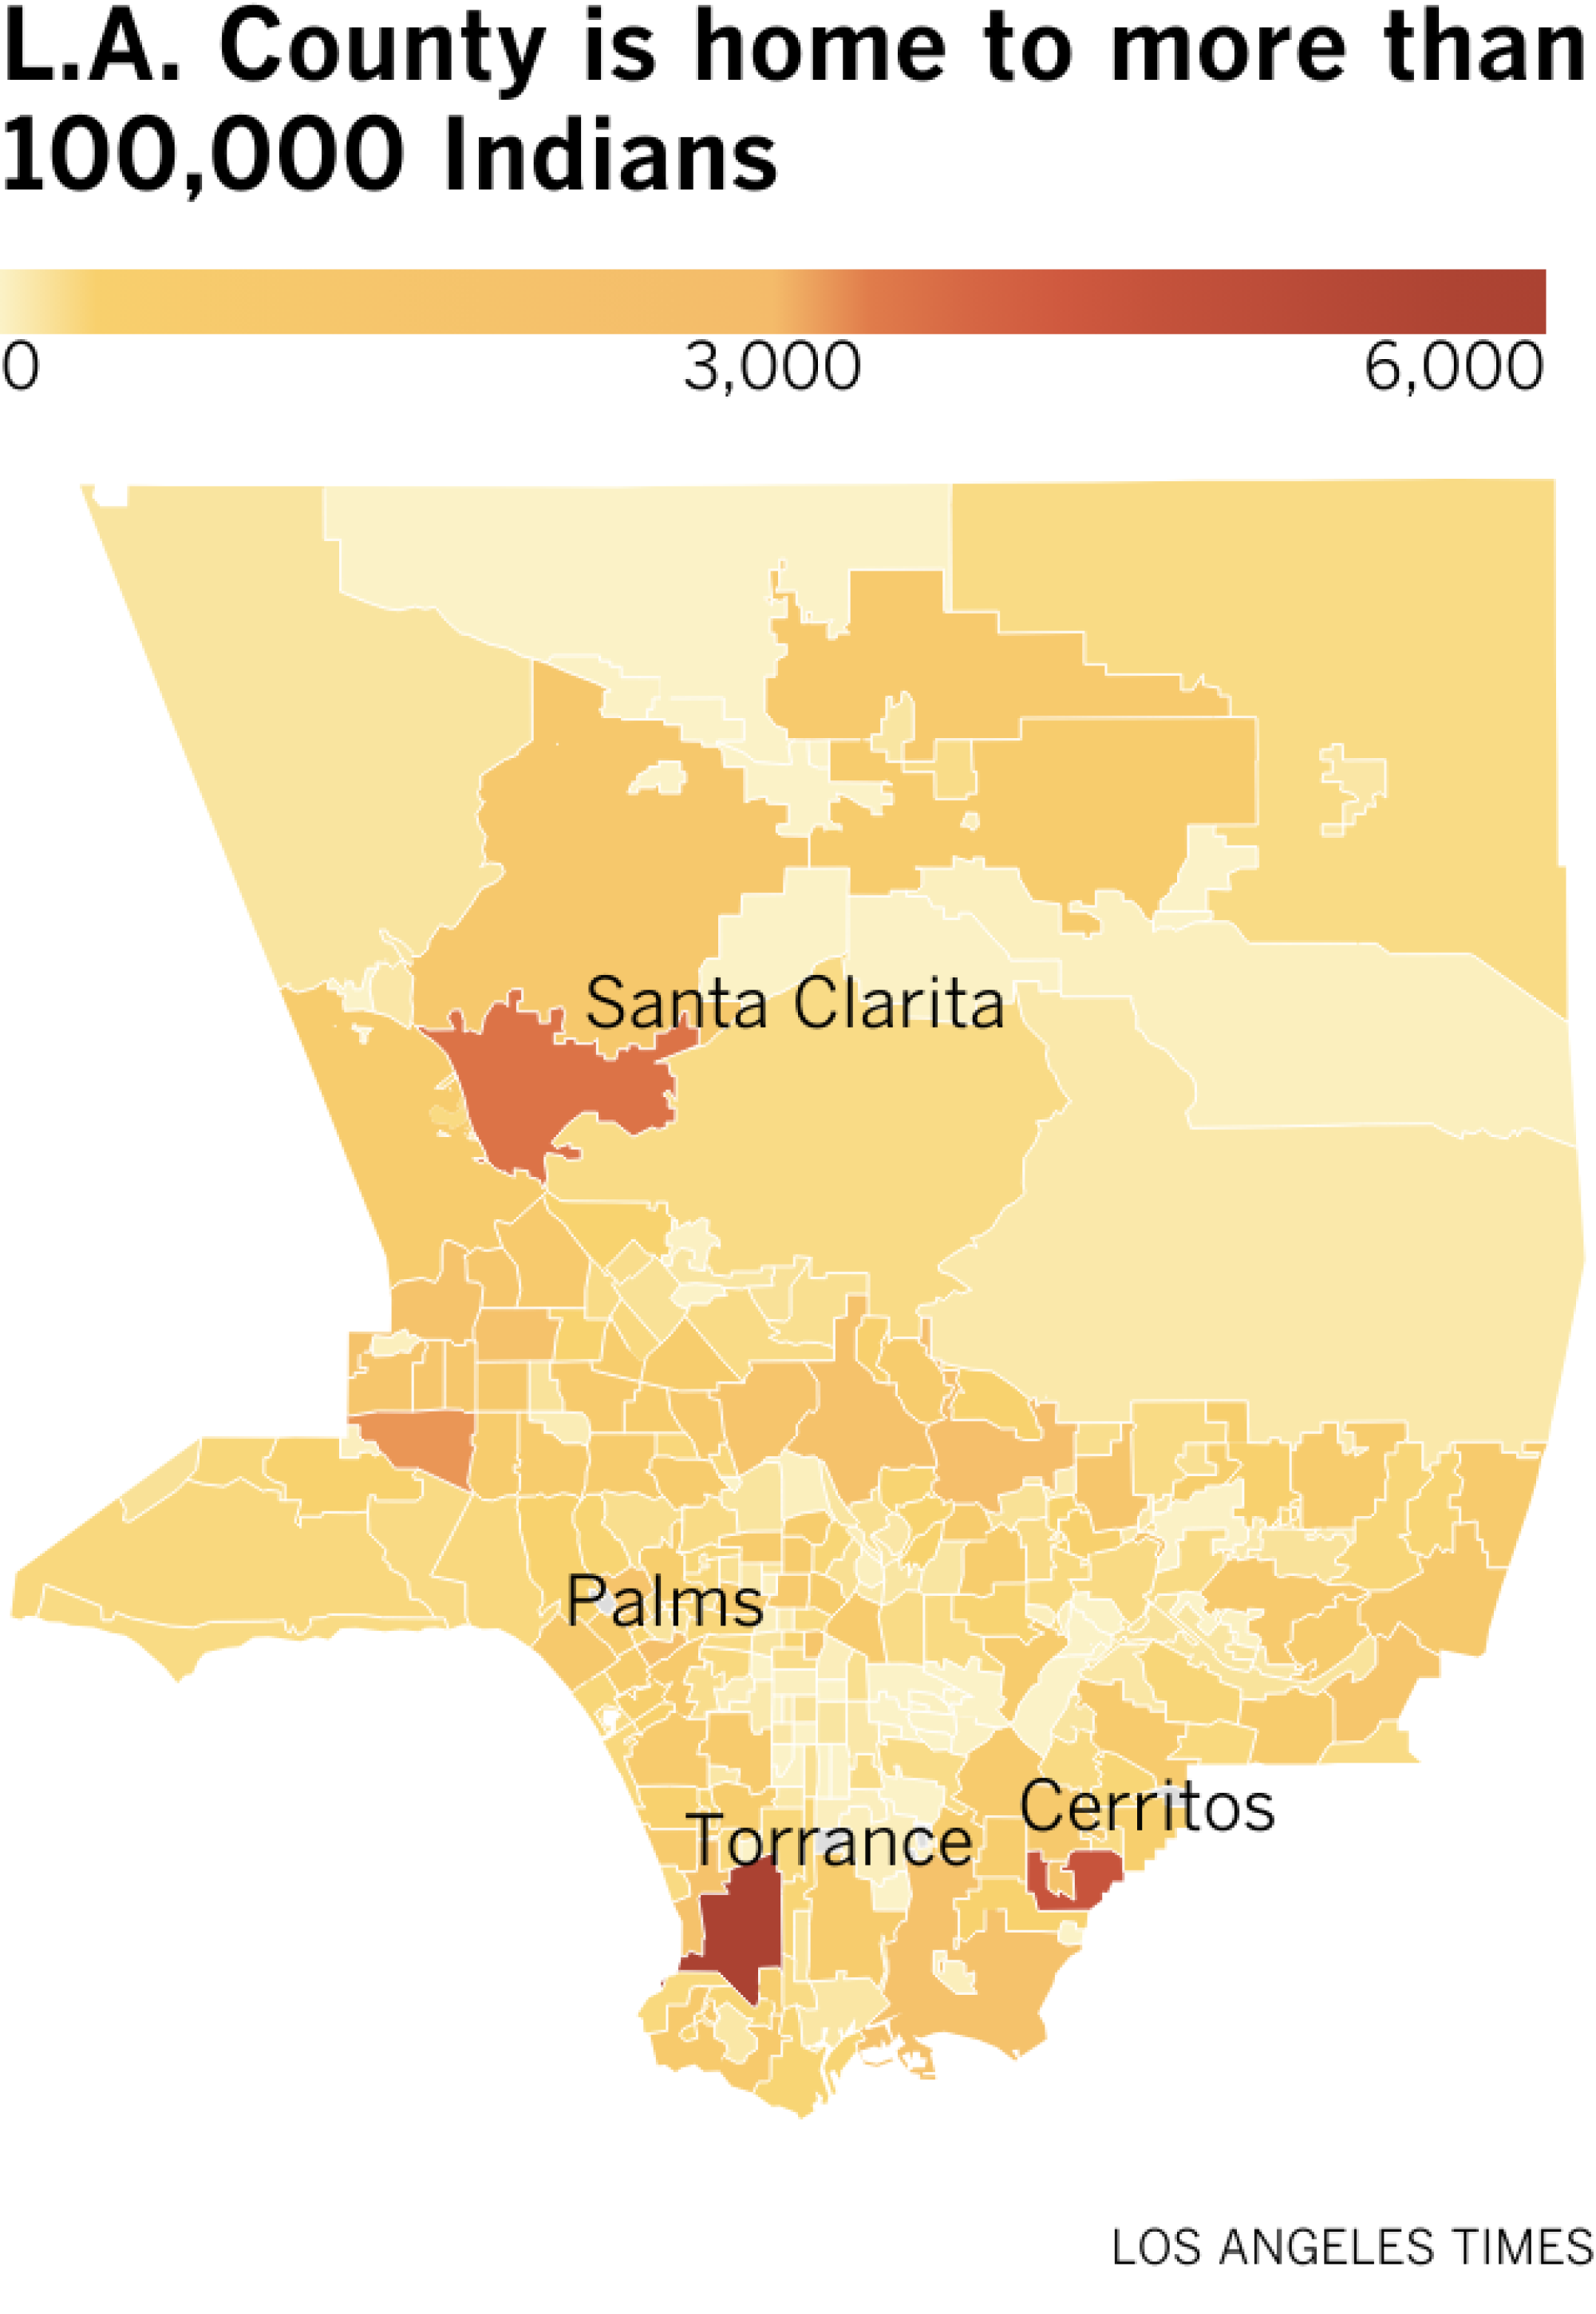 L.A. County is home to more than 100,000 Indians